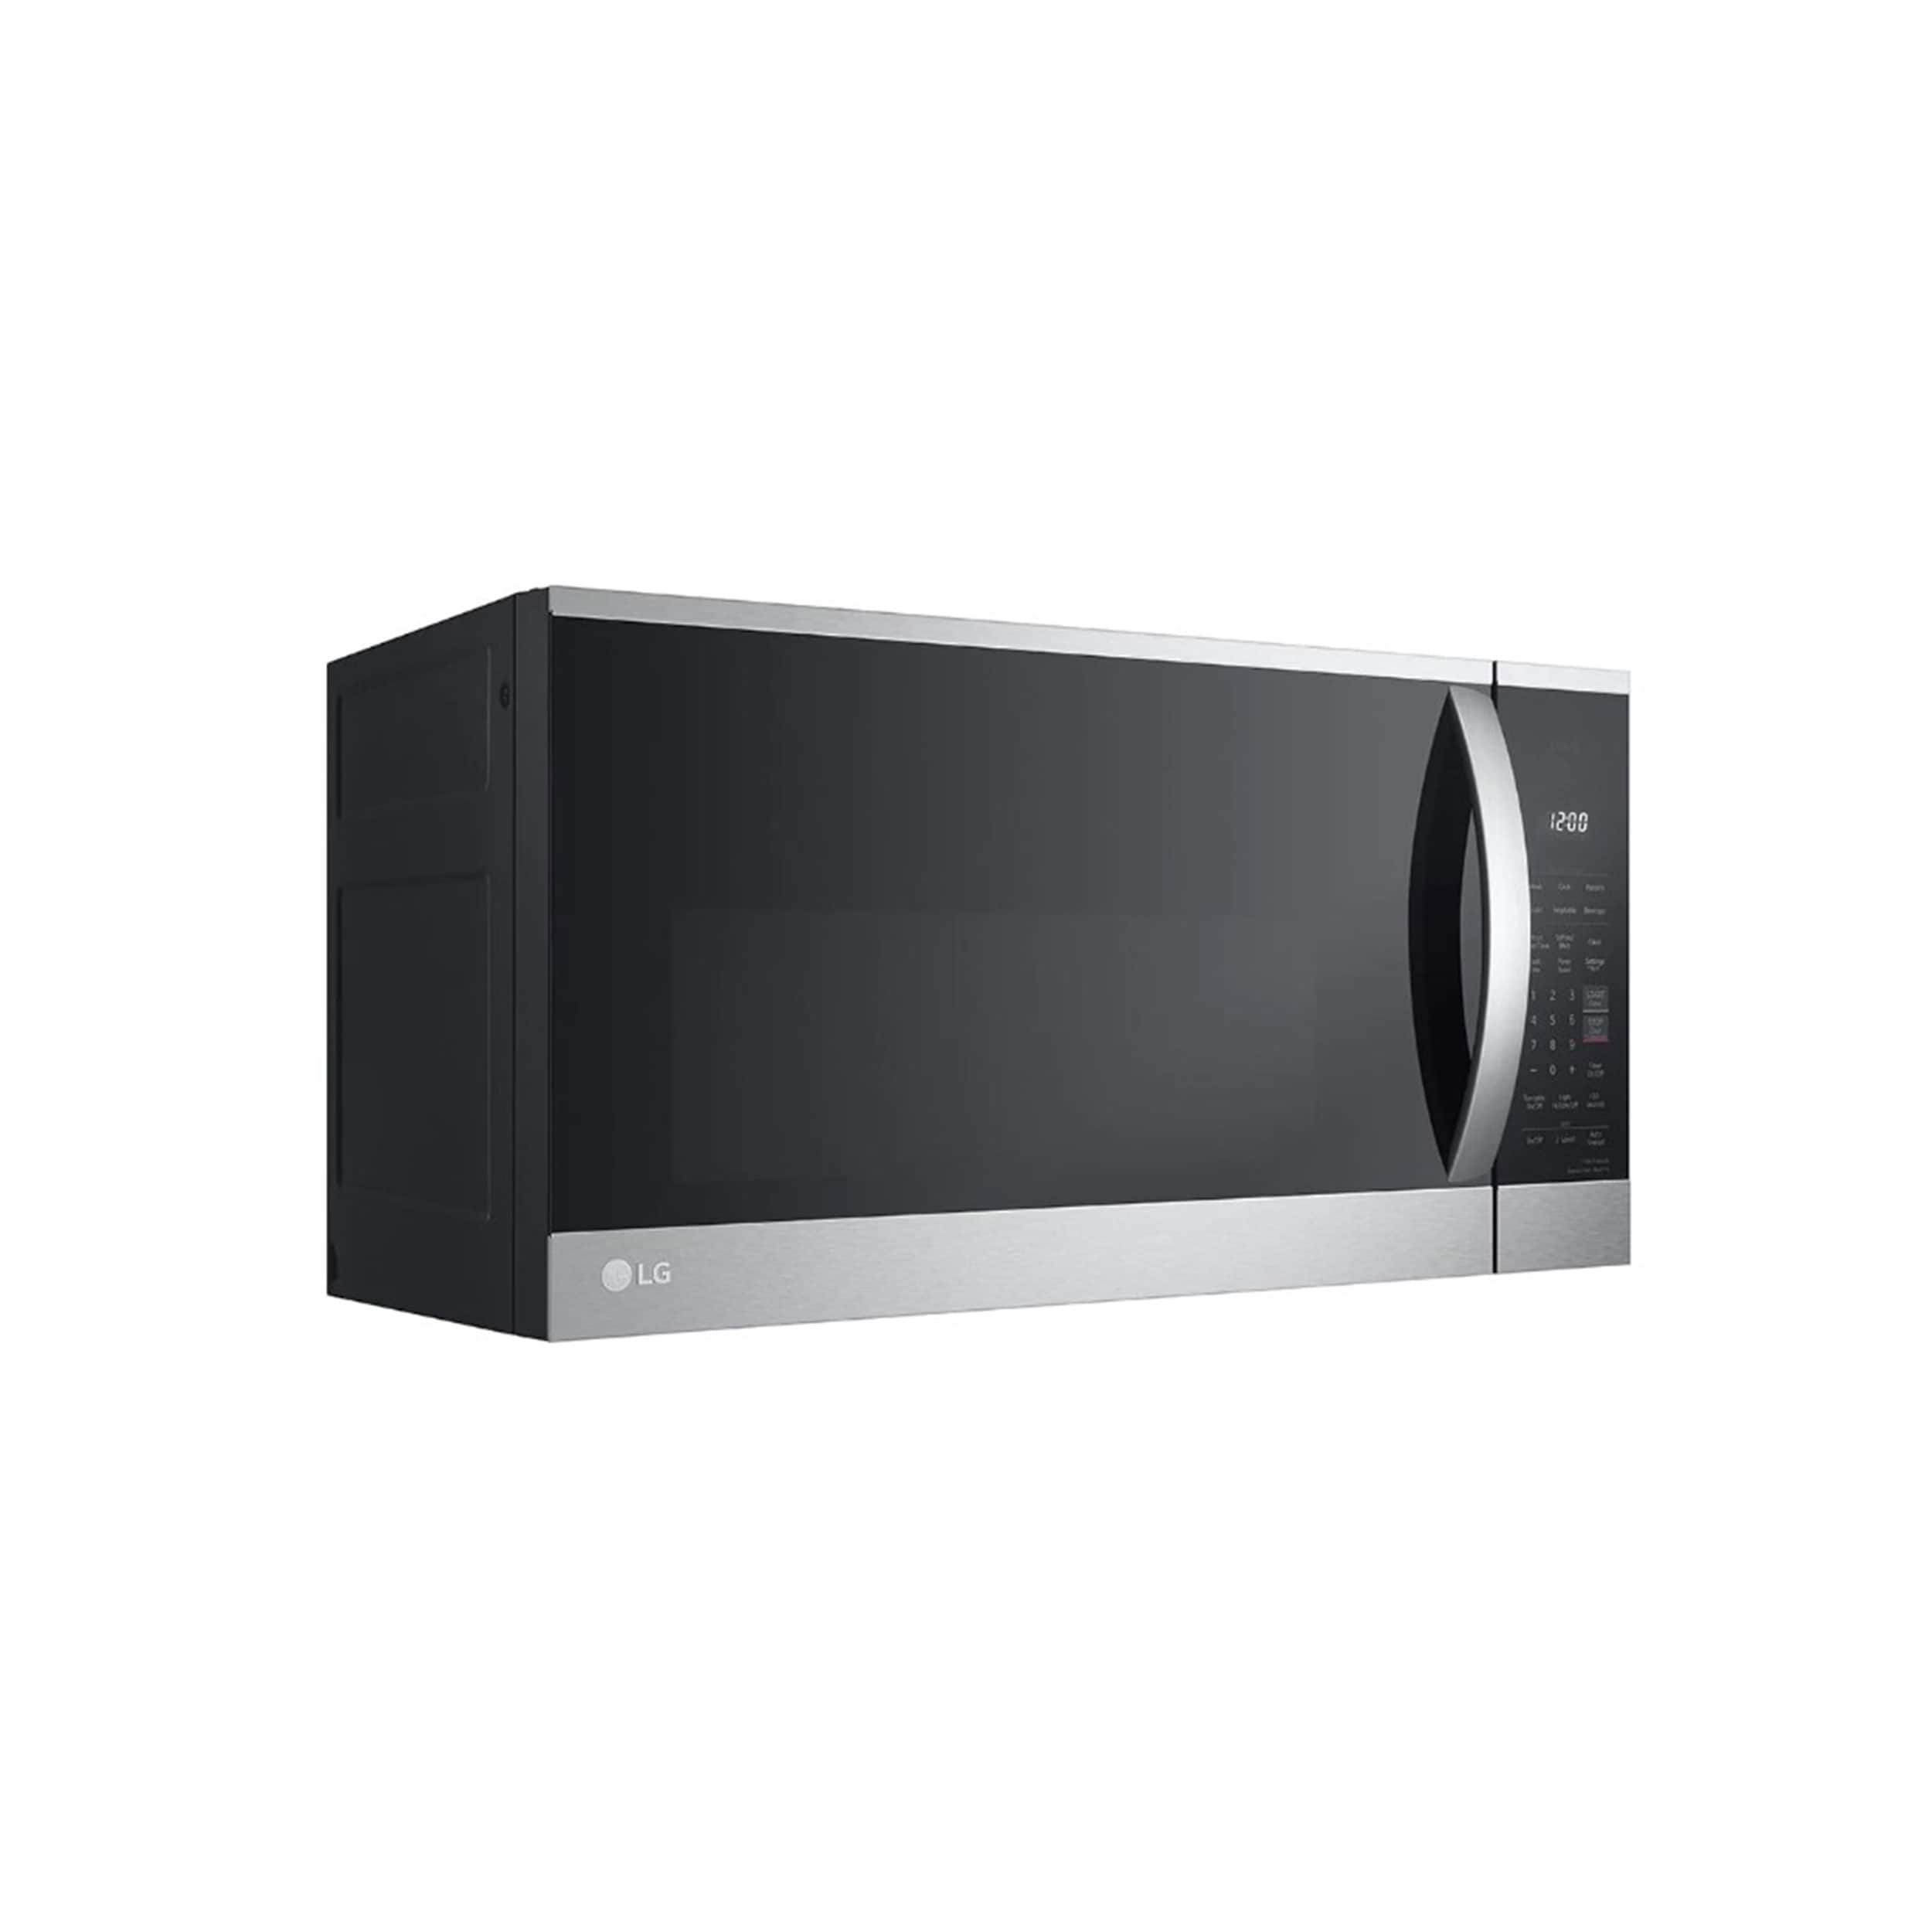 LG 1.8 cu. ft. Smart Wi-Fi Enabled Over-the-Range Microwave Oven with EasyClean - Print Proof Stainless Steel